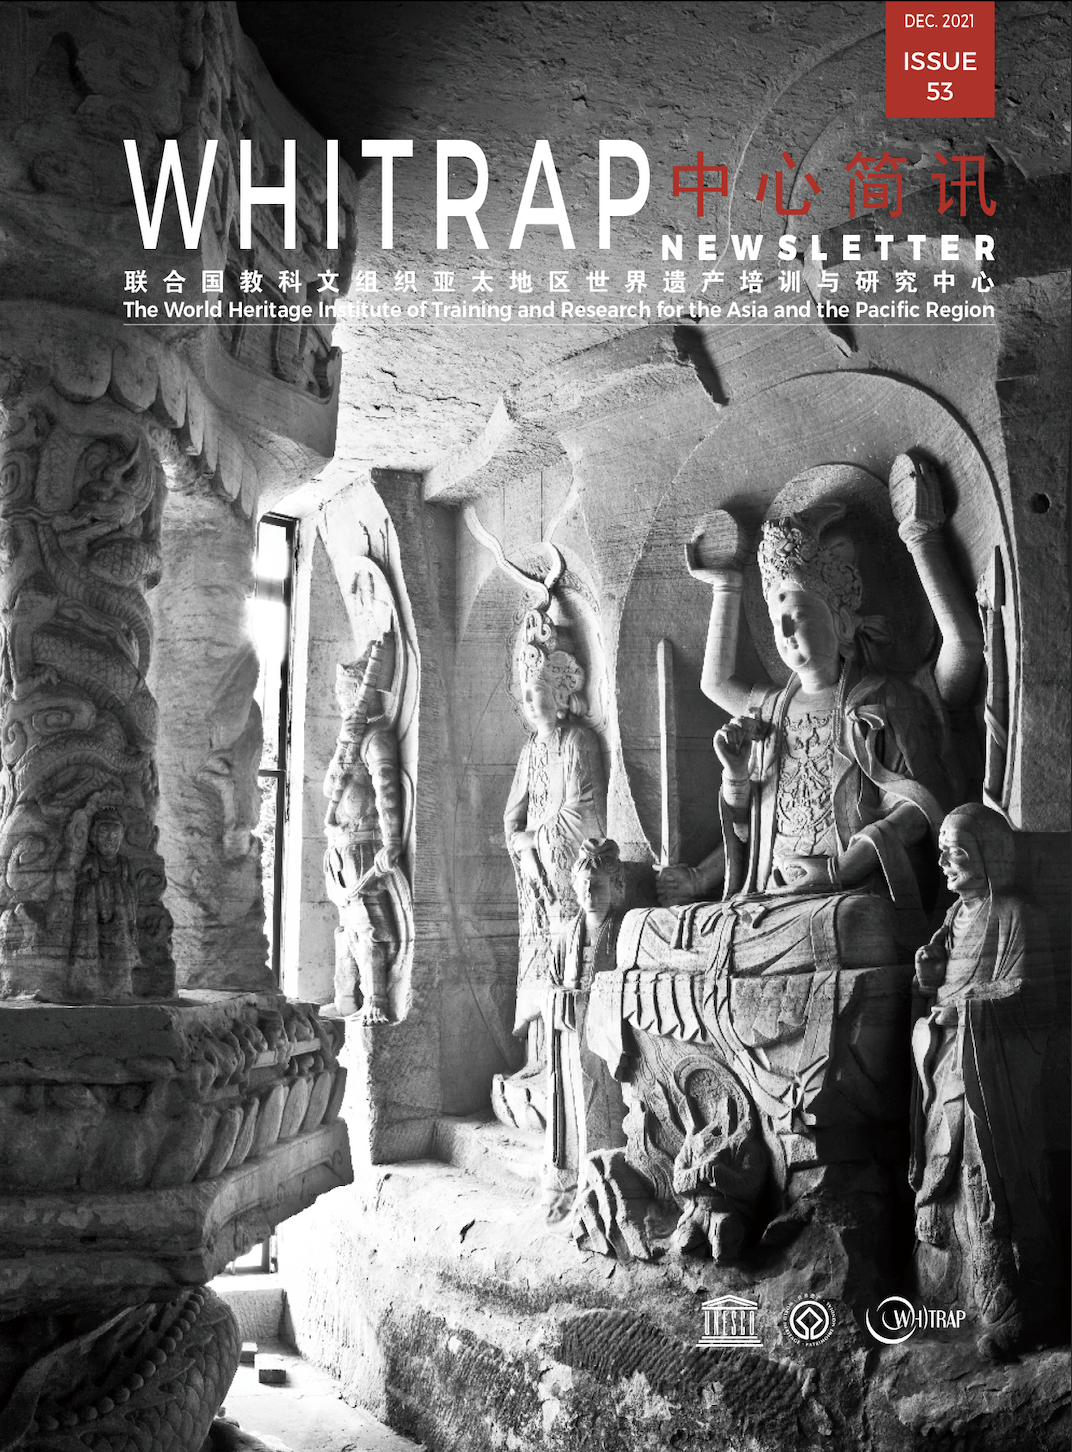 WHITRAP Newsletter (Issue 53)